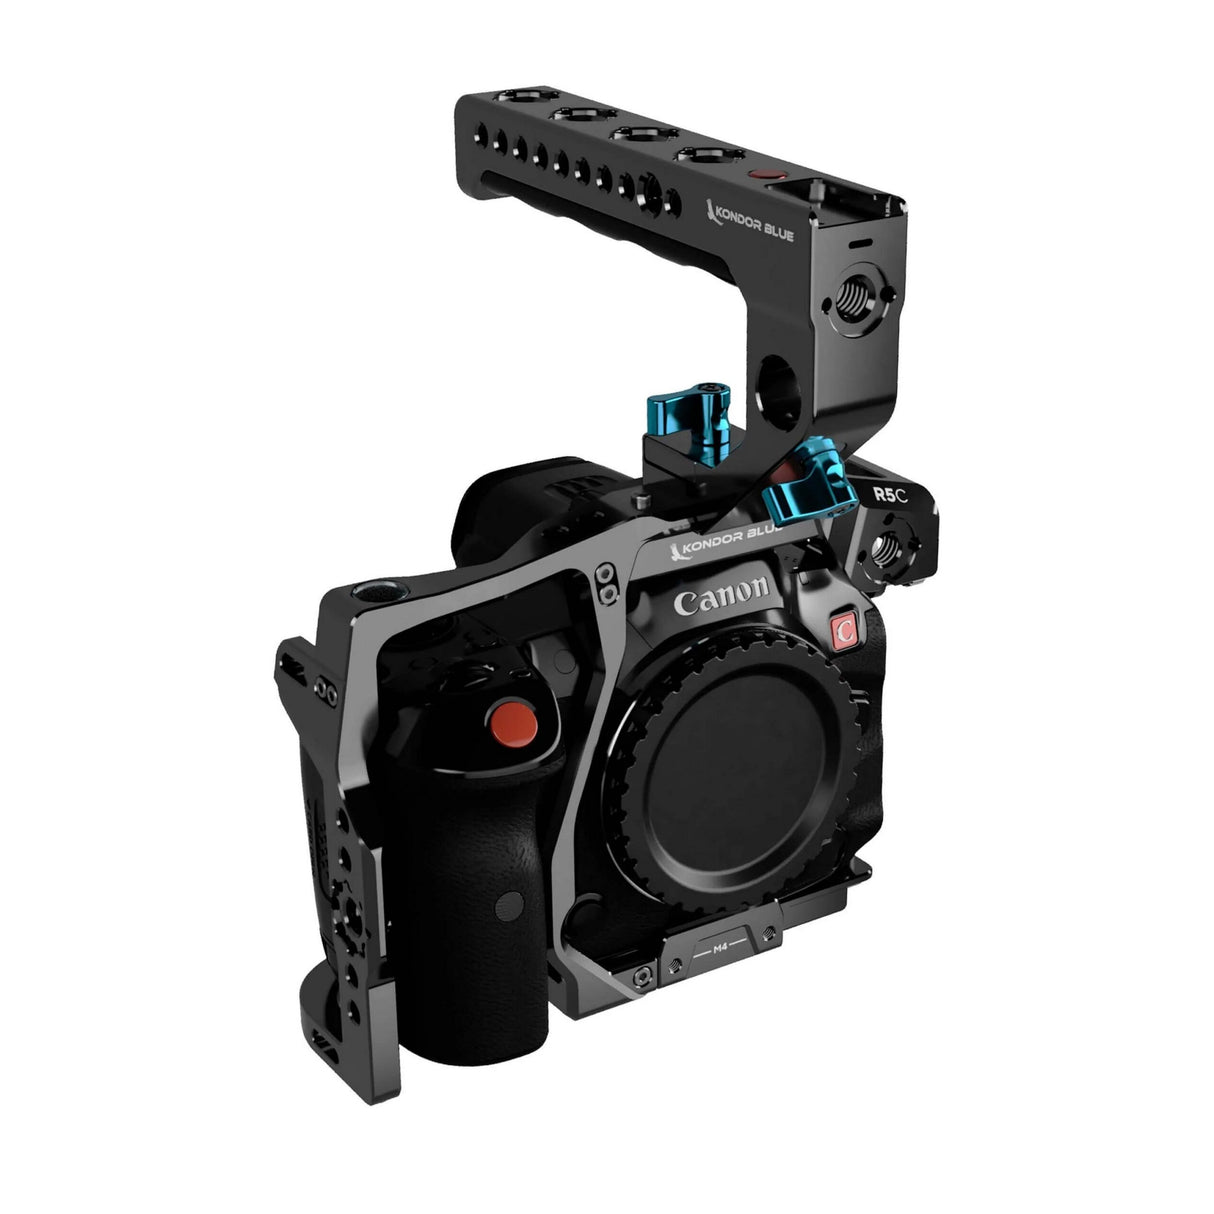 Kondor Blue Cine Cage for Canon R5C with Top Handle, Space Gray